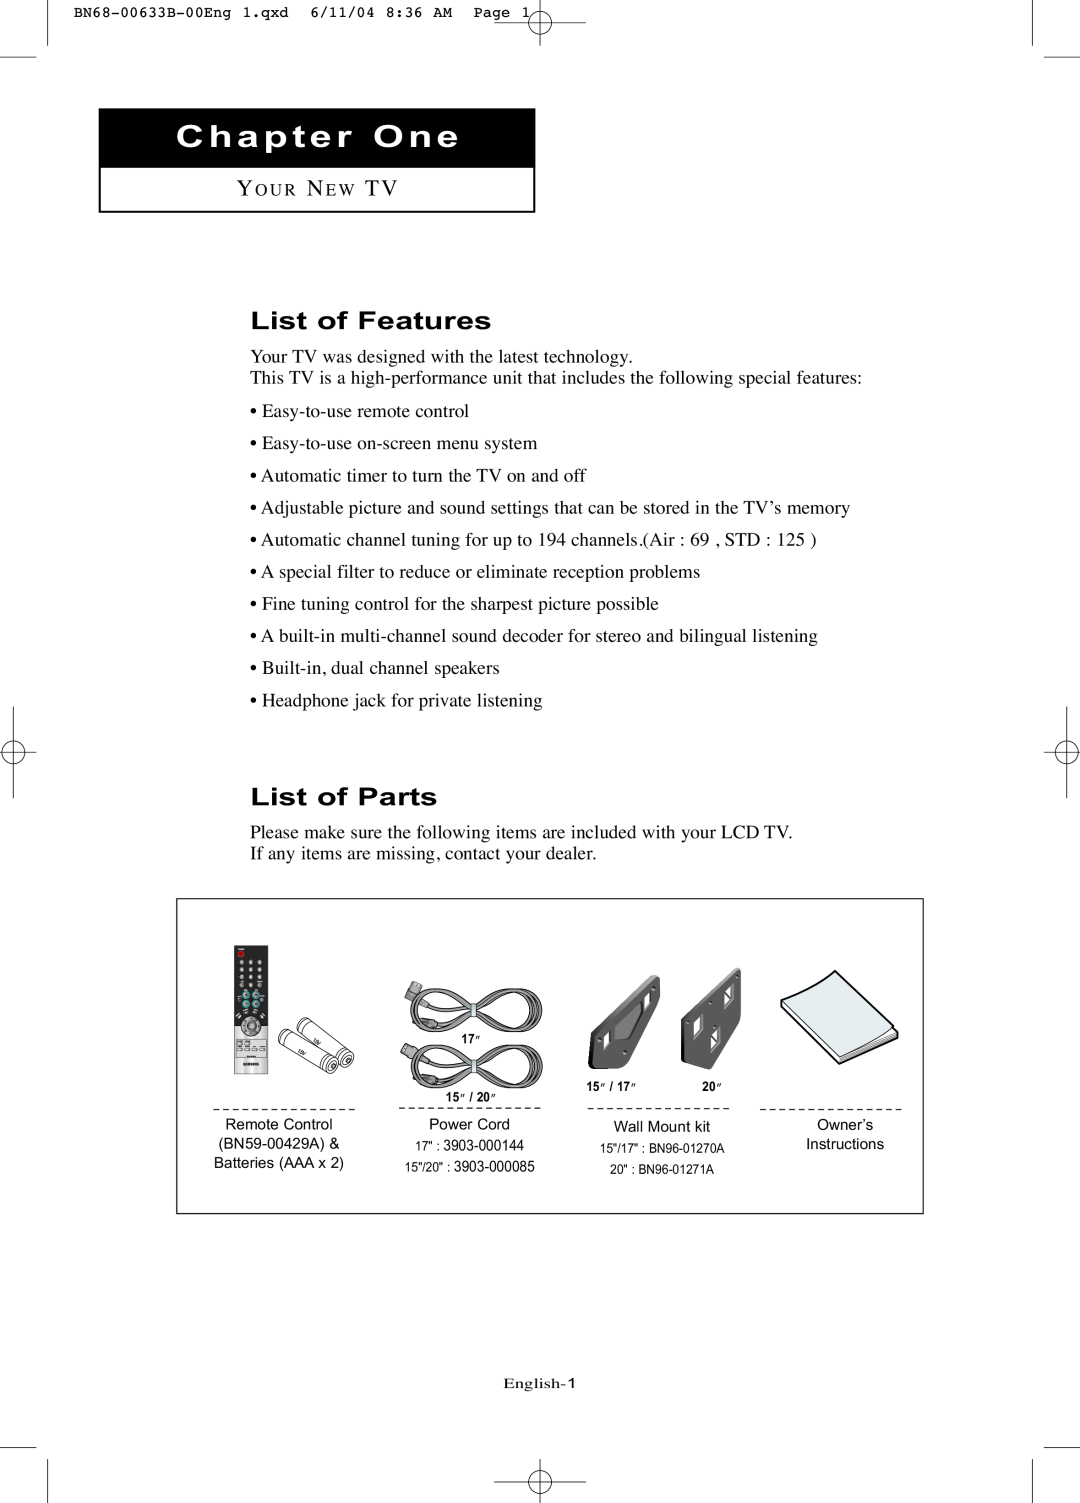 Samsung LT-P1545 manual Chapter One, List of Features, List of Parts 